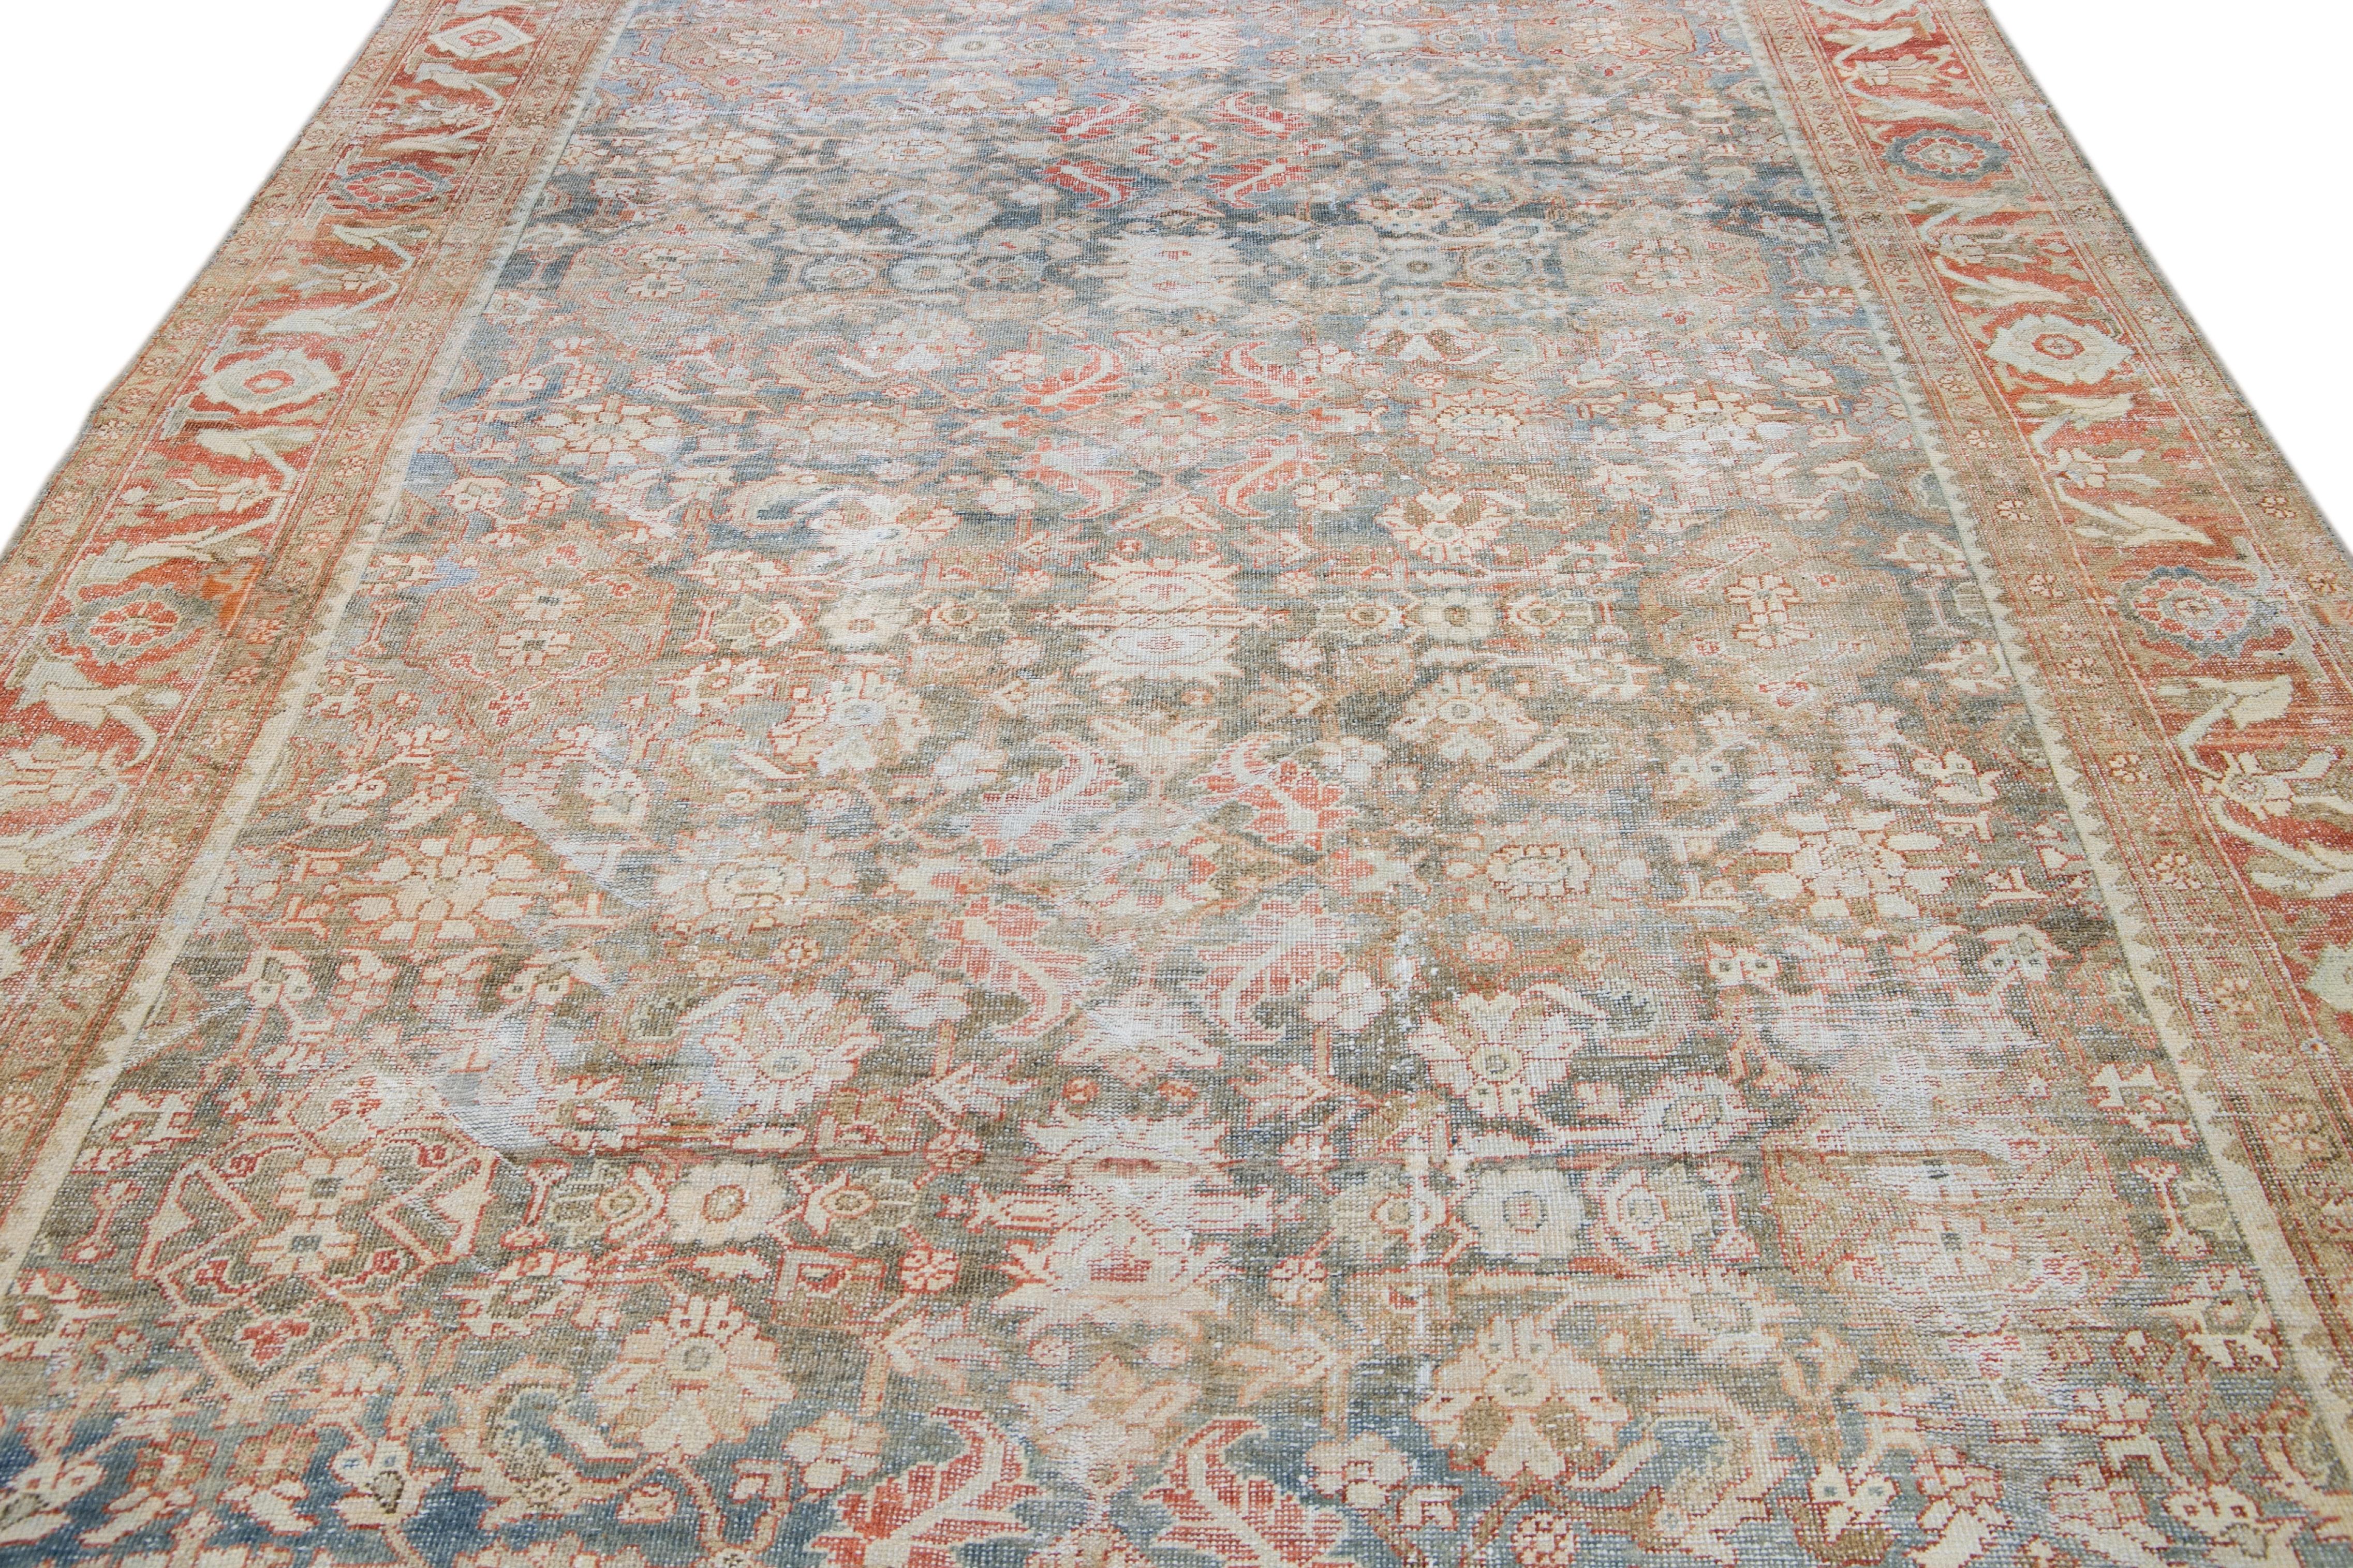 Islamic Antique Gray Mahal Handmade Floral Pattern Persian Wool Rug For Sale